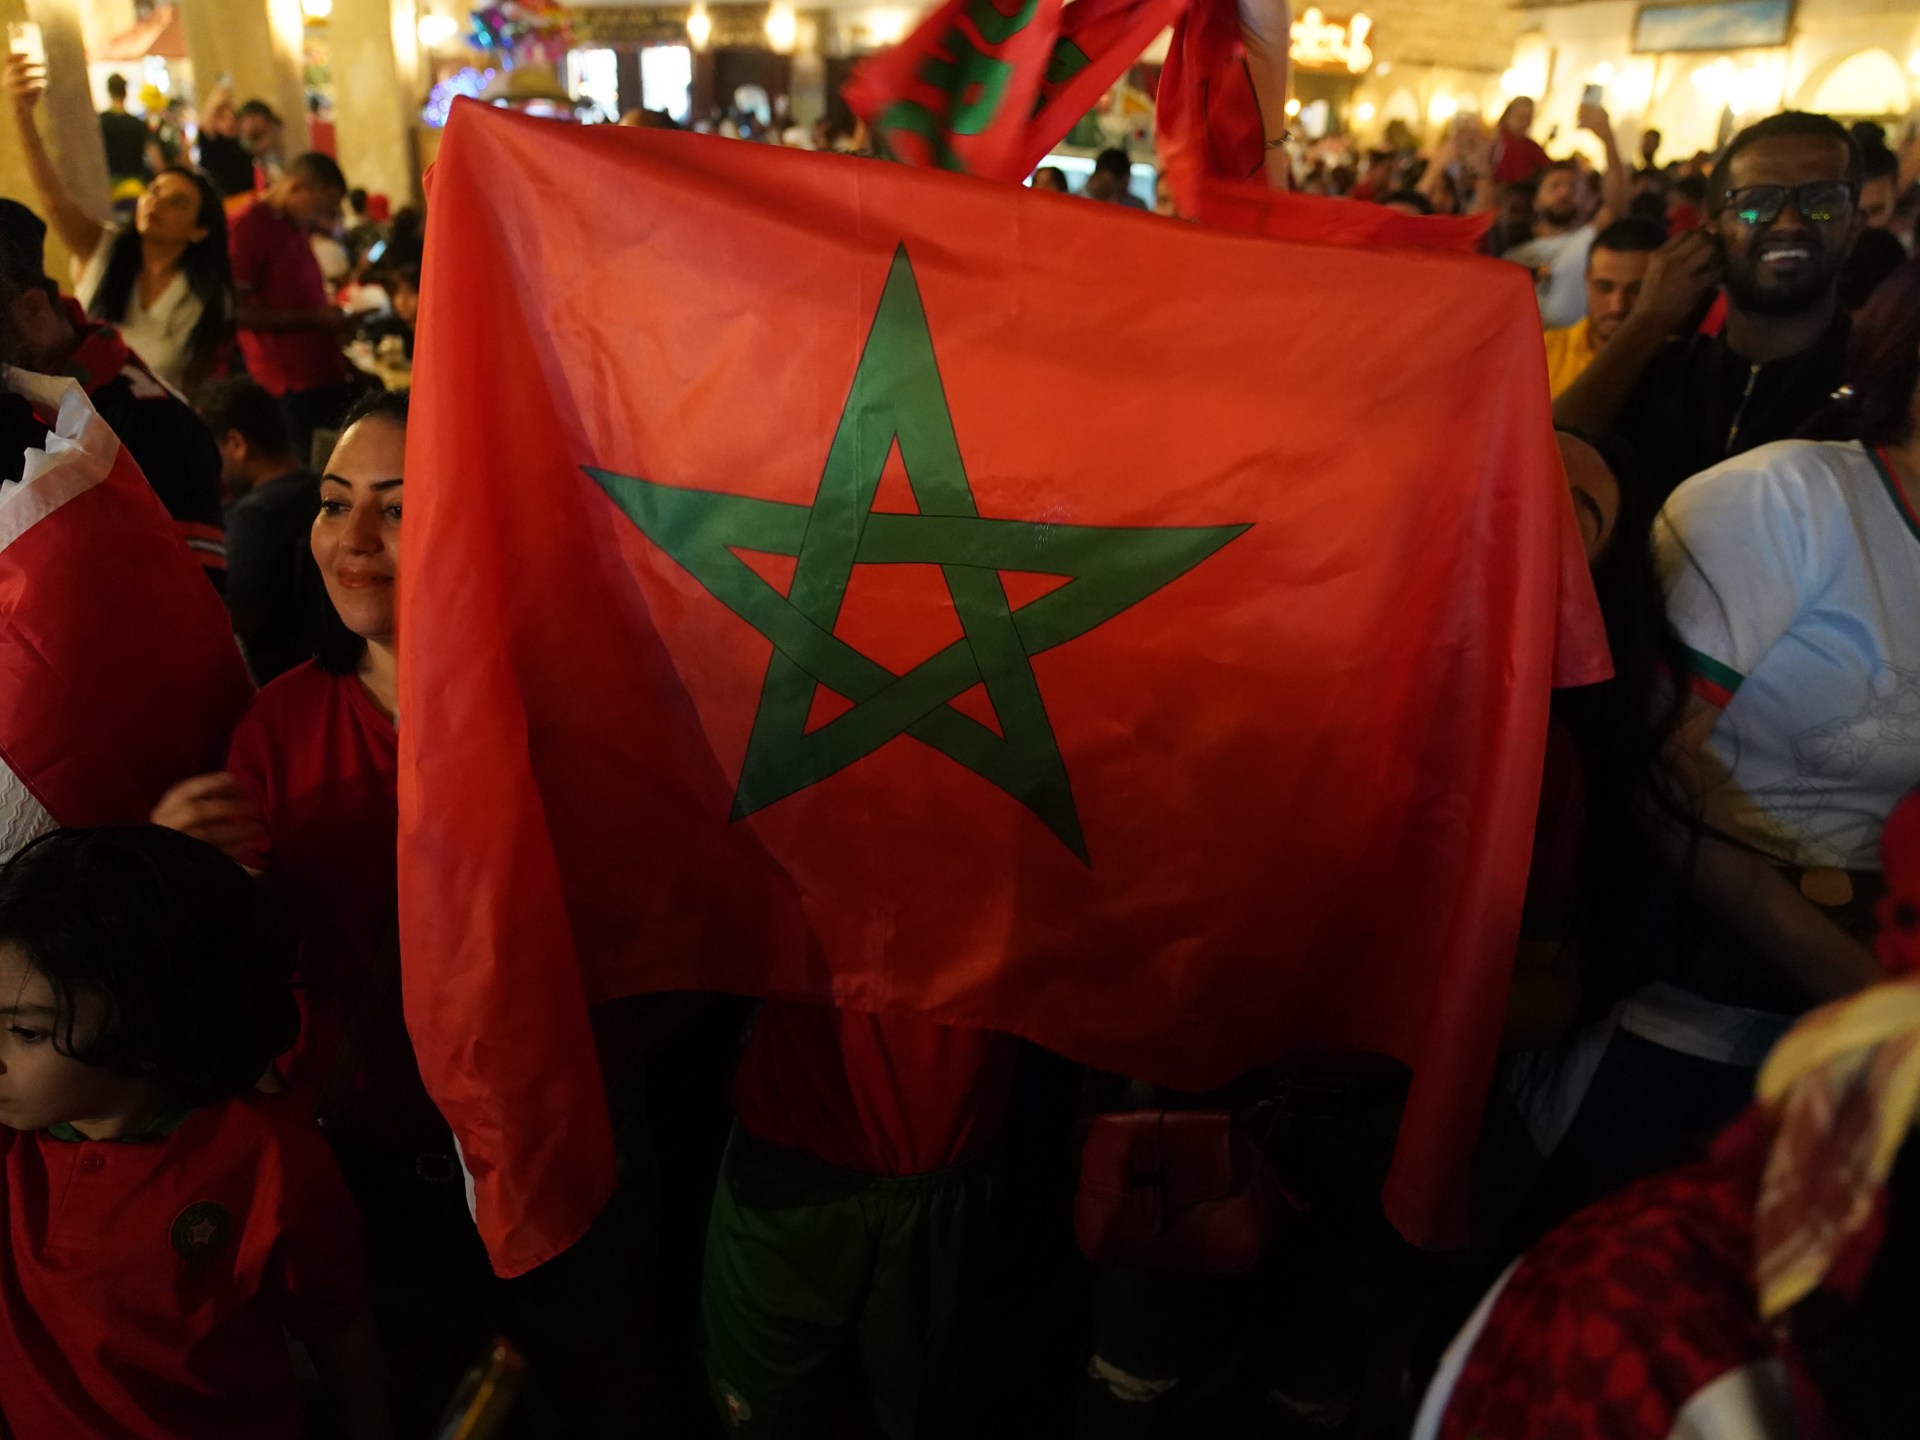 Morocco joining Spain, Portugal in football’s 2030 World Cup bid | Football News